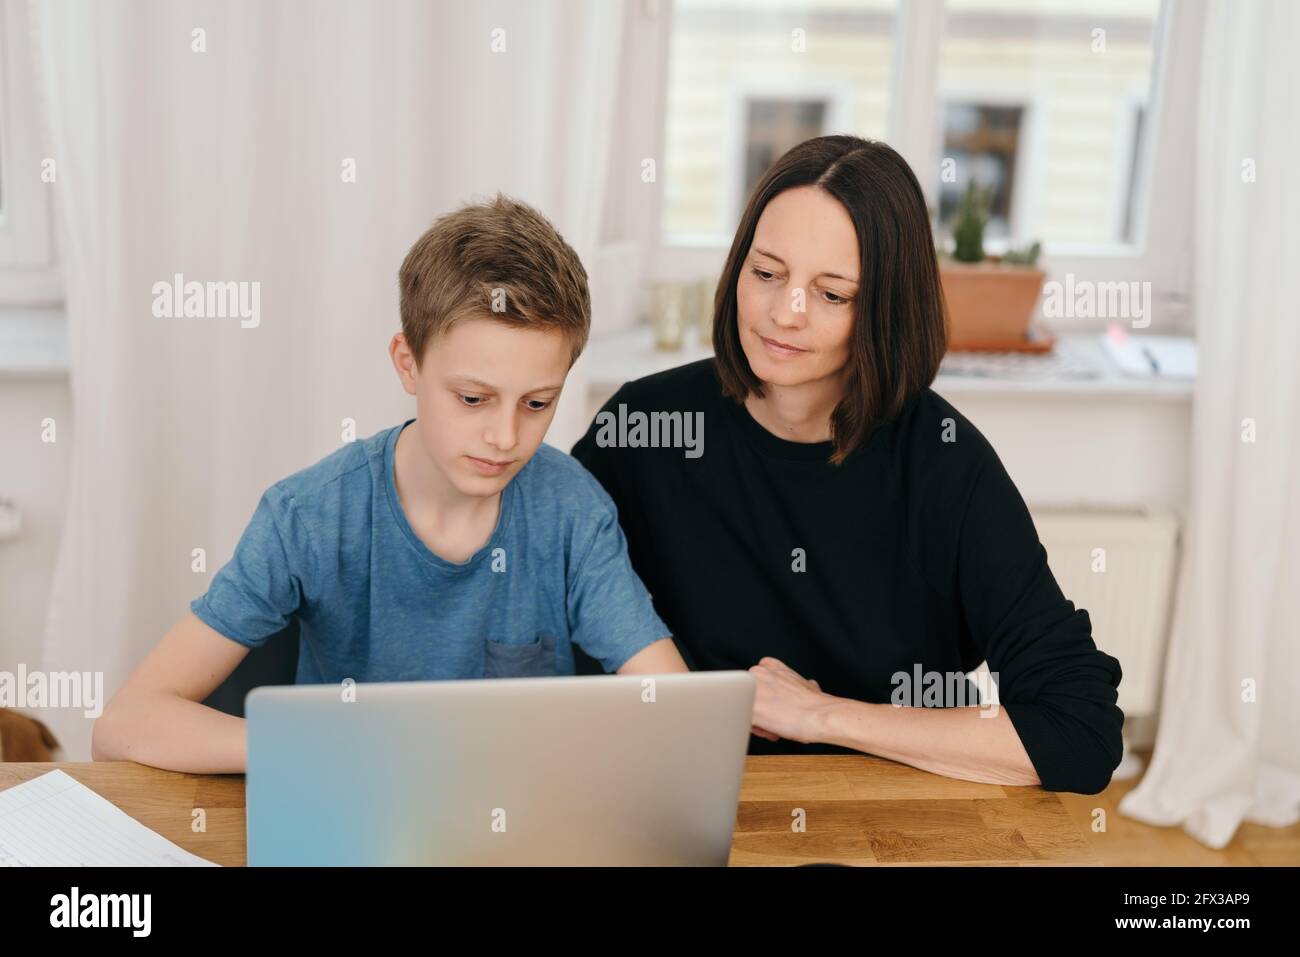 Mother helping her son with his studies on a laptop computer at home during the forced lockdown for the Coronavirus or Covid-19 pandemic Stock Photo